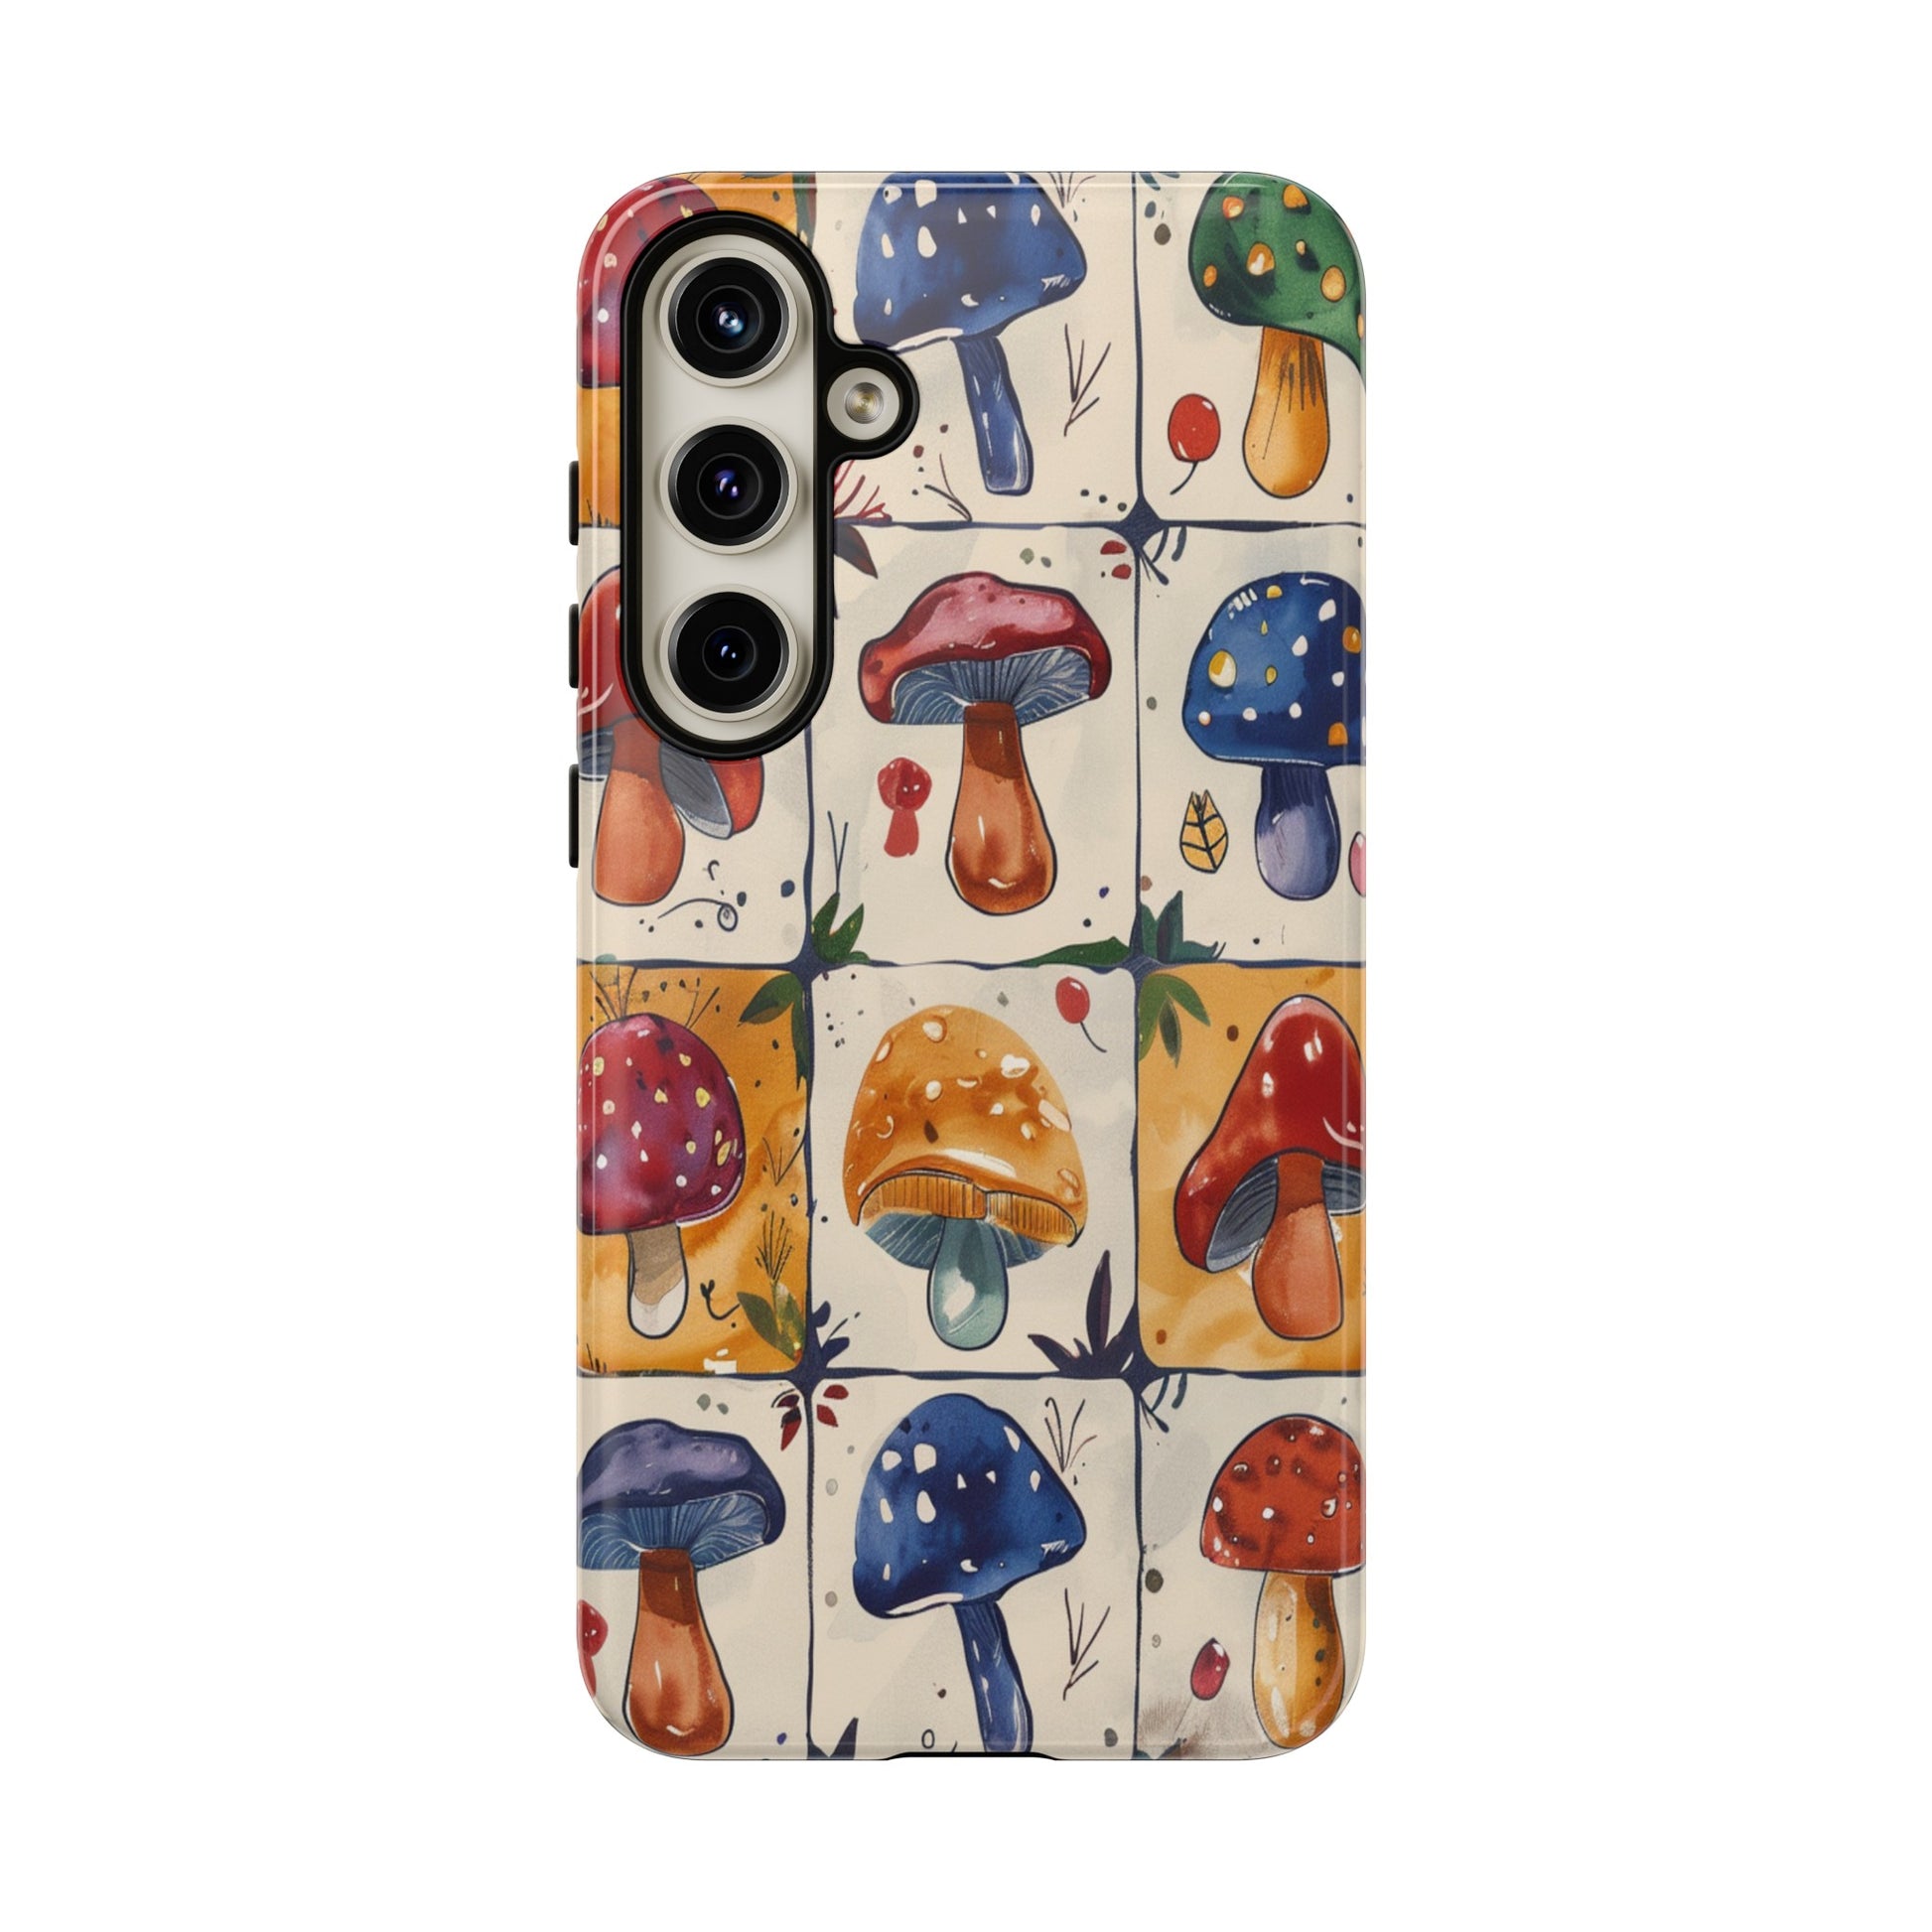 Psychedelic Phone case